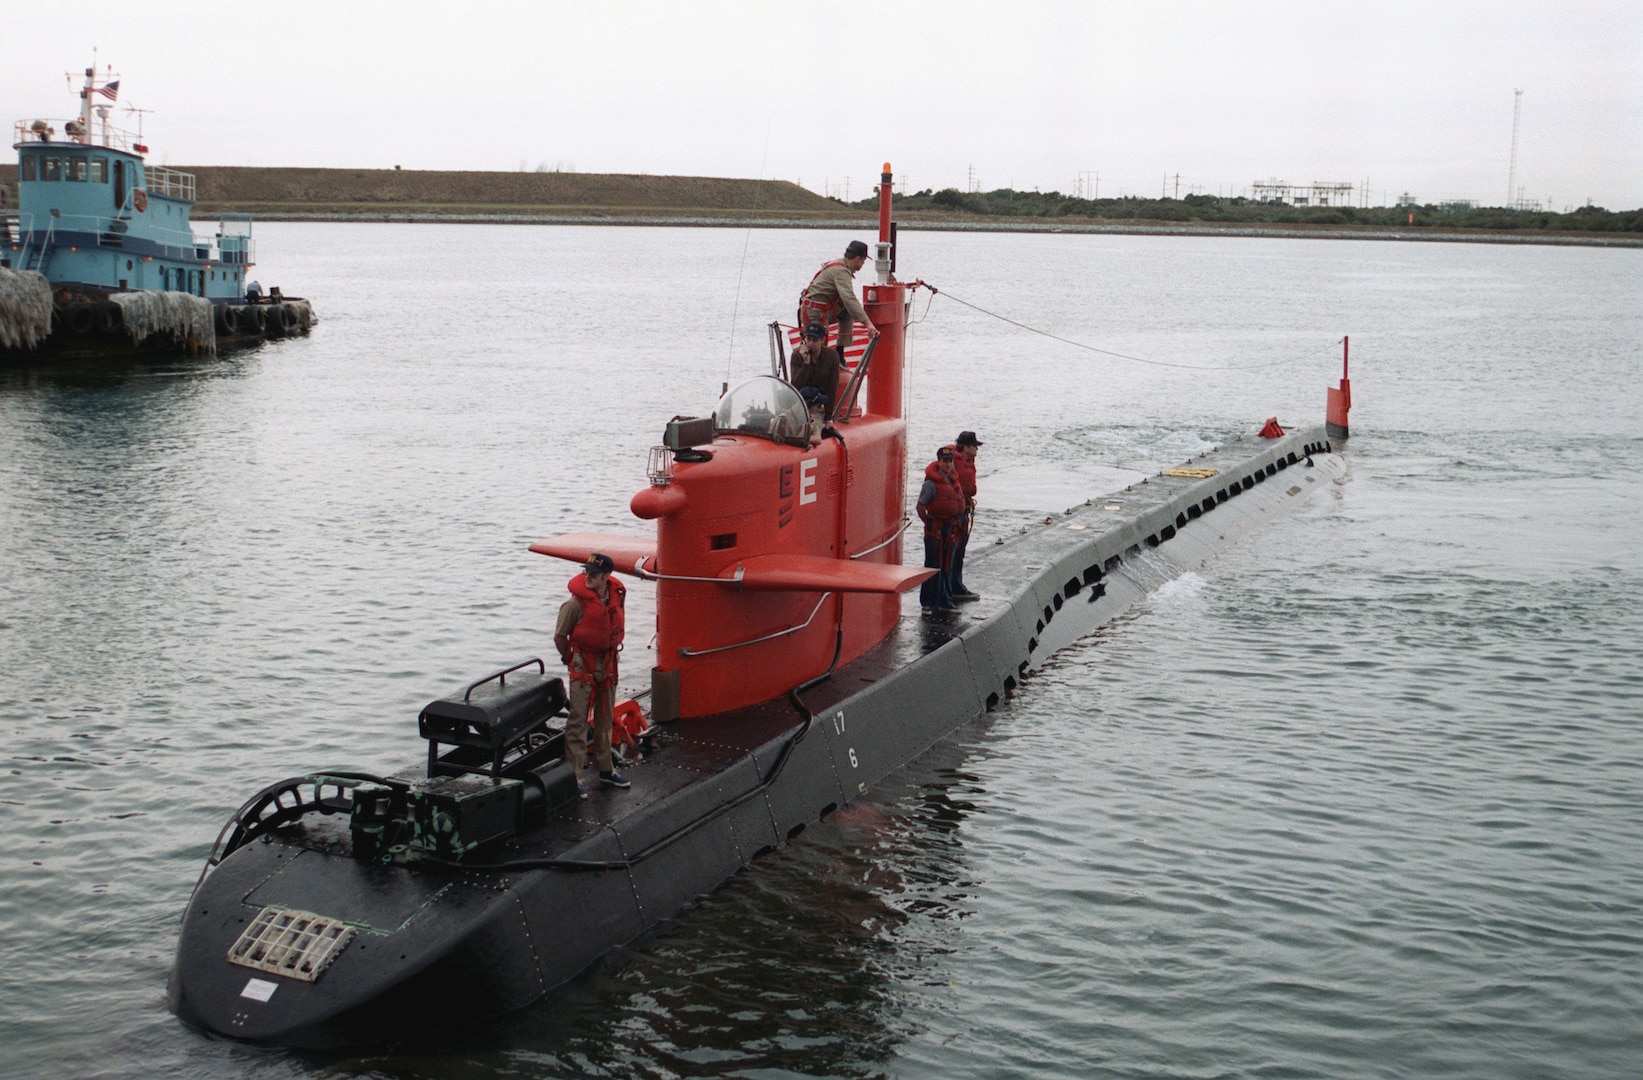 A port bow view of the nuclear-powered research submersible NR-1 as it approaches port in this undated photo. The Sailors atop the mini nuclear submarine illstrate just how small the vessel was. (U.S. Navy photo by JOC Peter D. Sundberg)